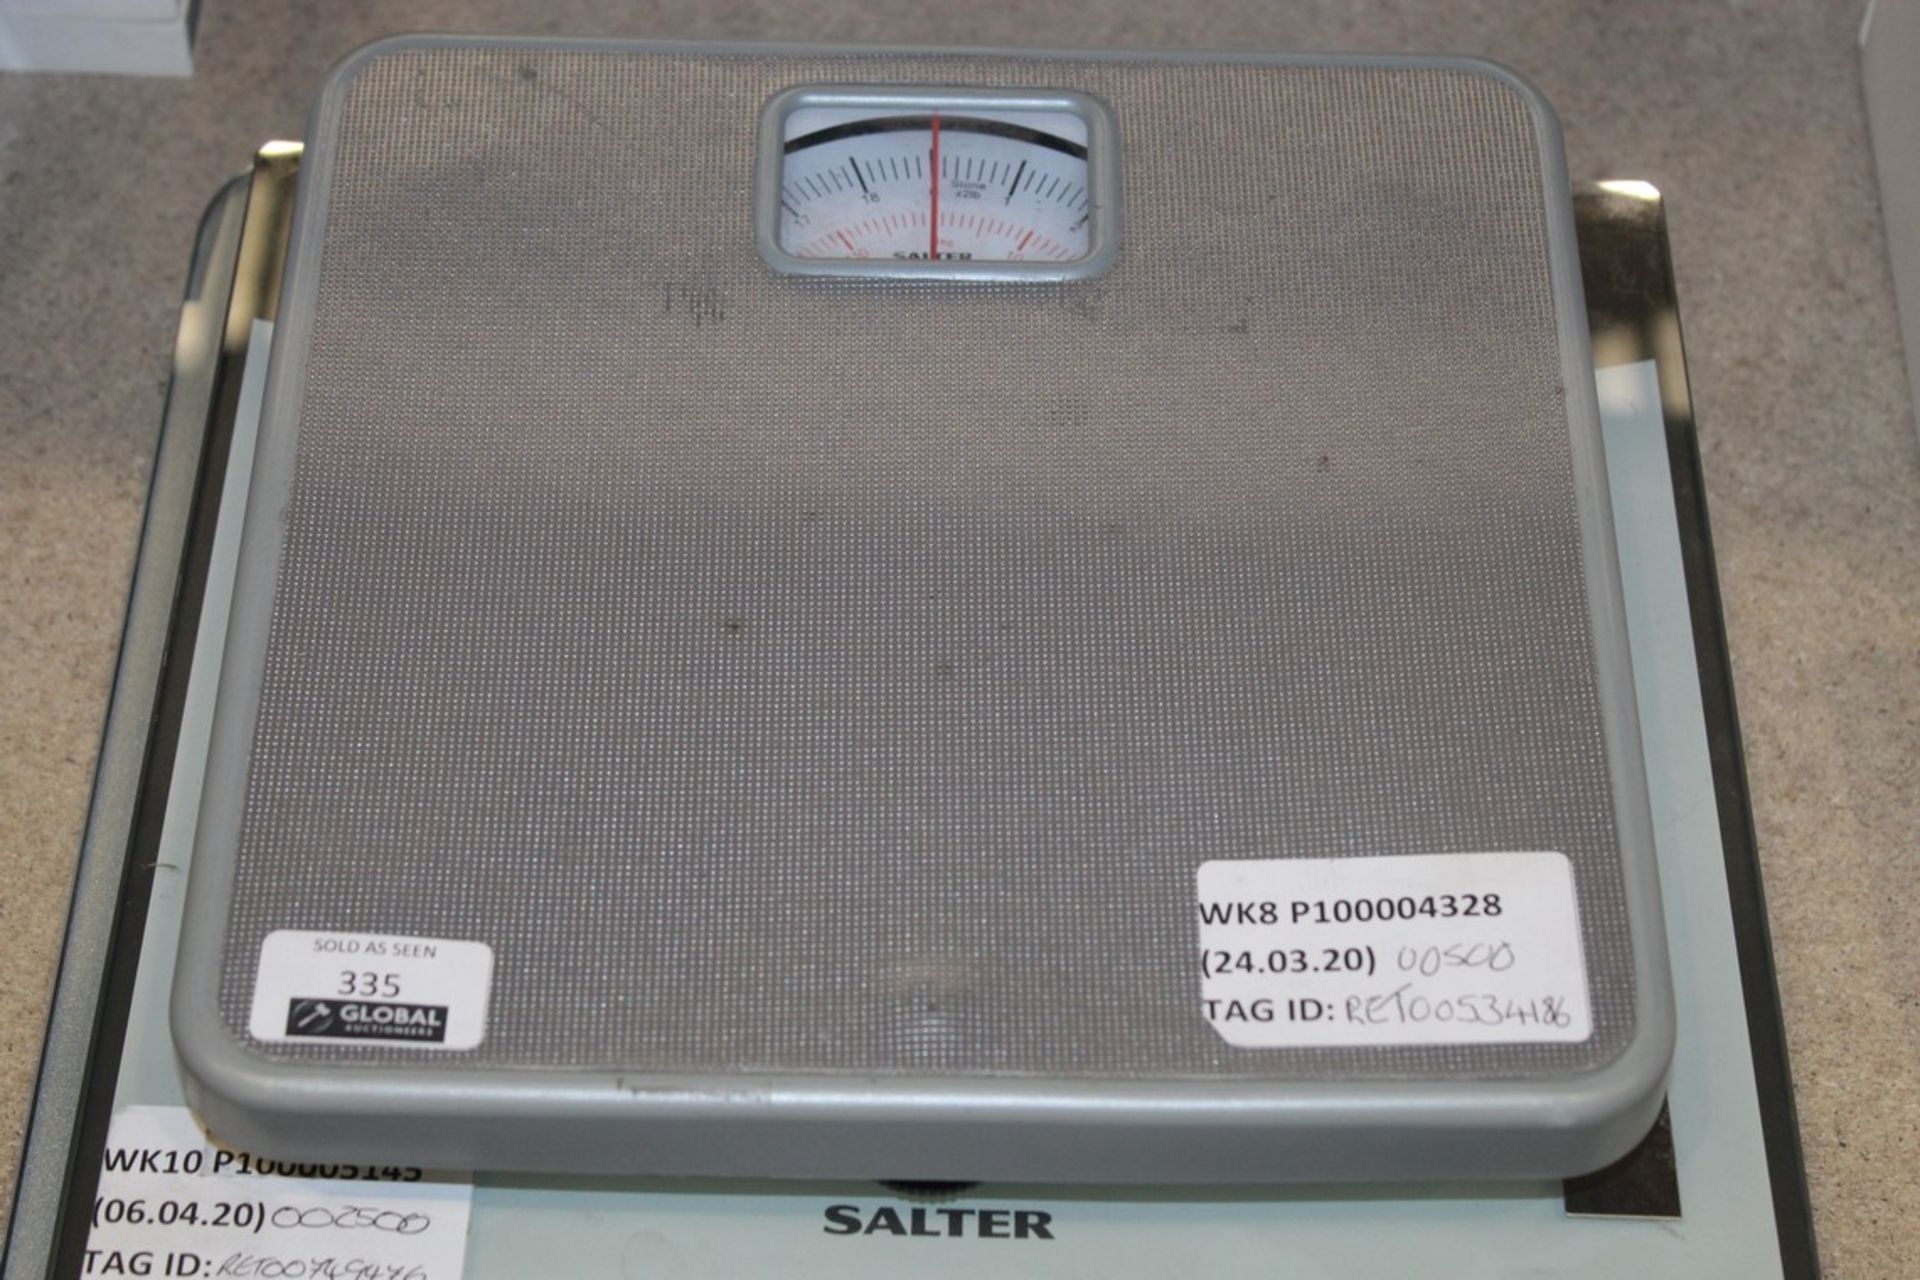 3 Assorted Unboxed Pairs of Salter Digital Mechanical Weighing Scales RRP £110 (RET0078496) (